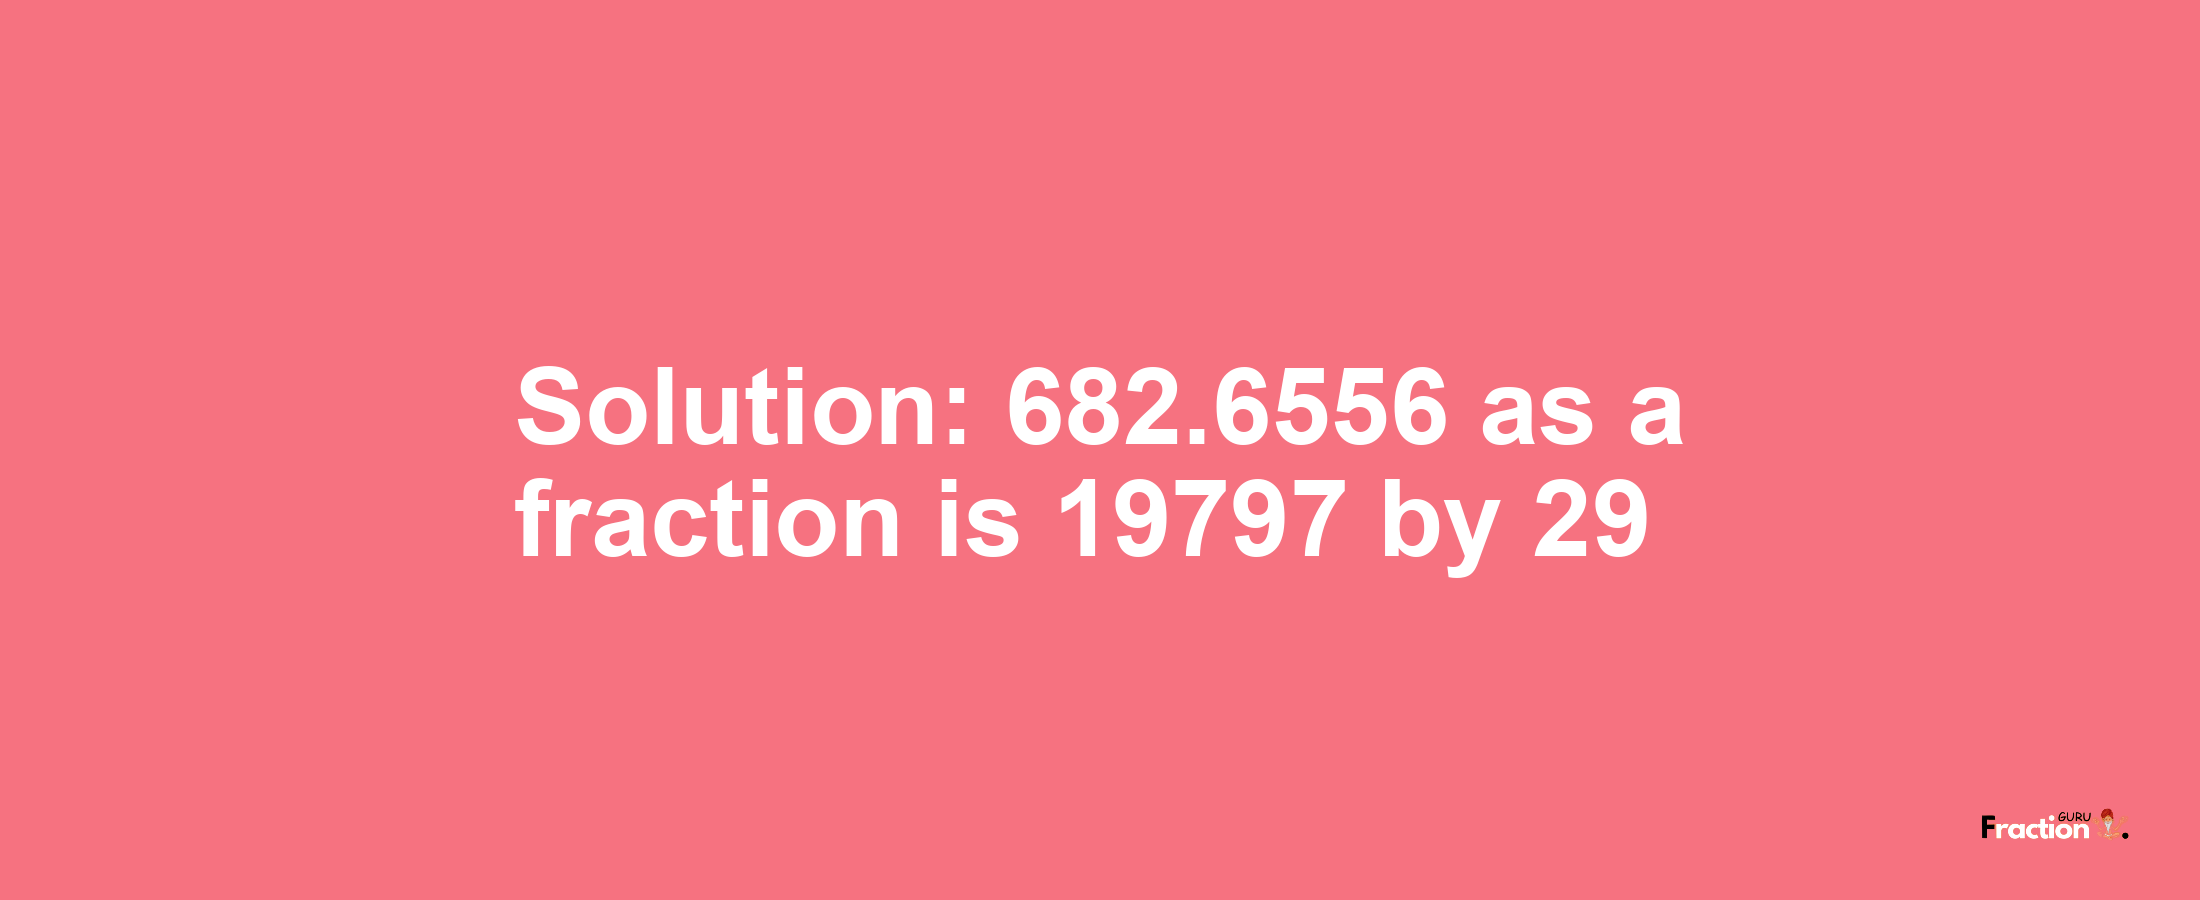 Solution:682.6556 as a fraction is 19797/29